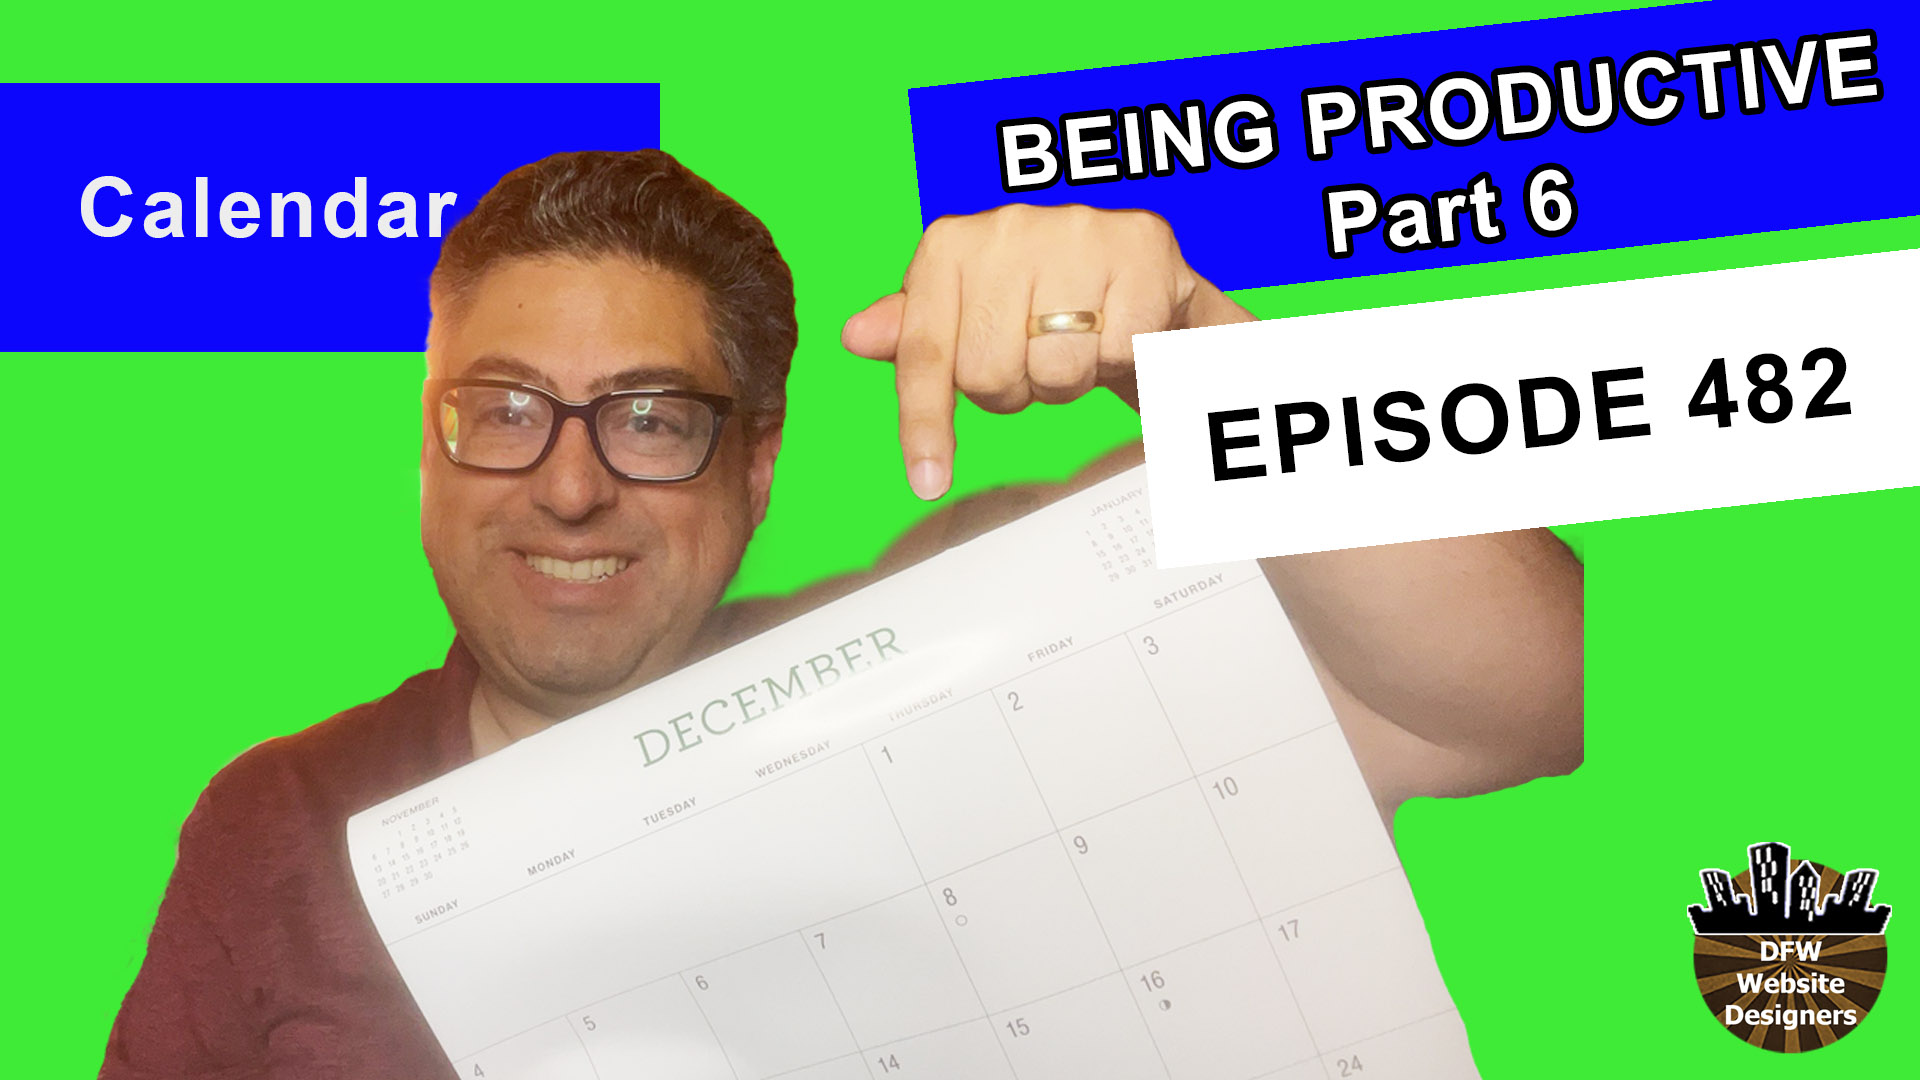 Episode 482 Being Productive Part 6 Calendars: Appointments, Day Specific Actions, Specific Information